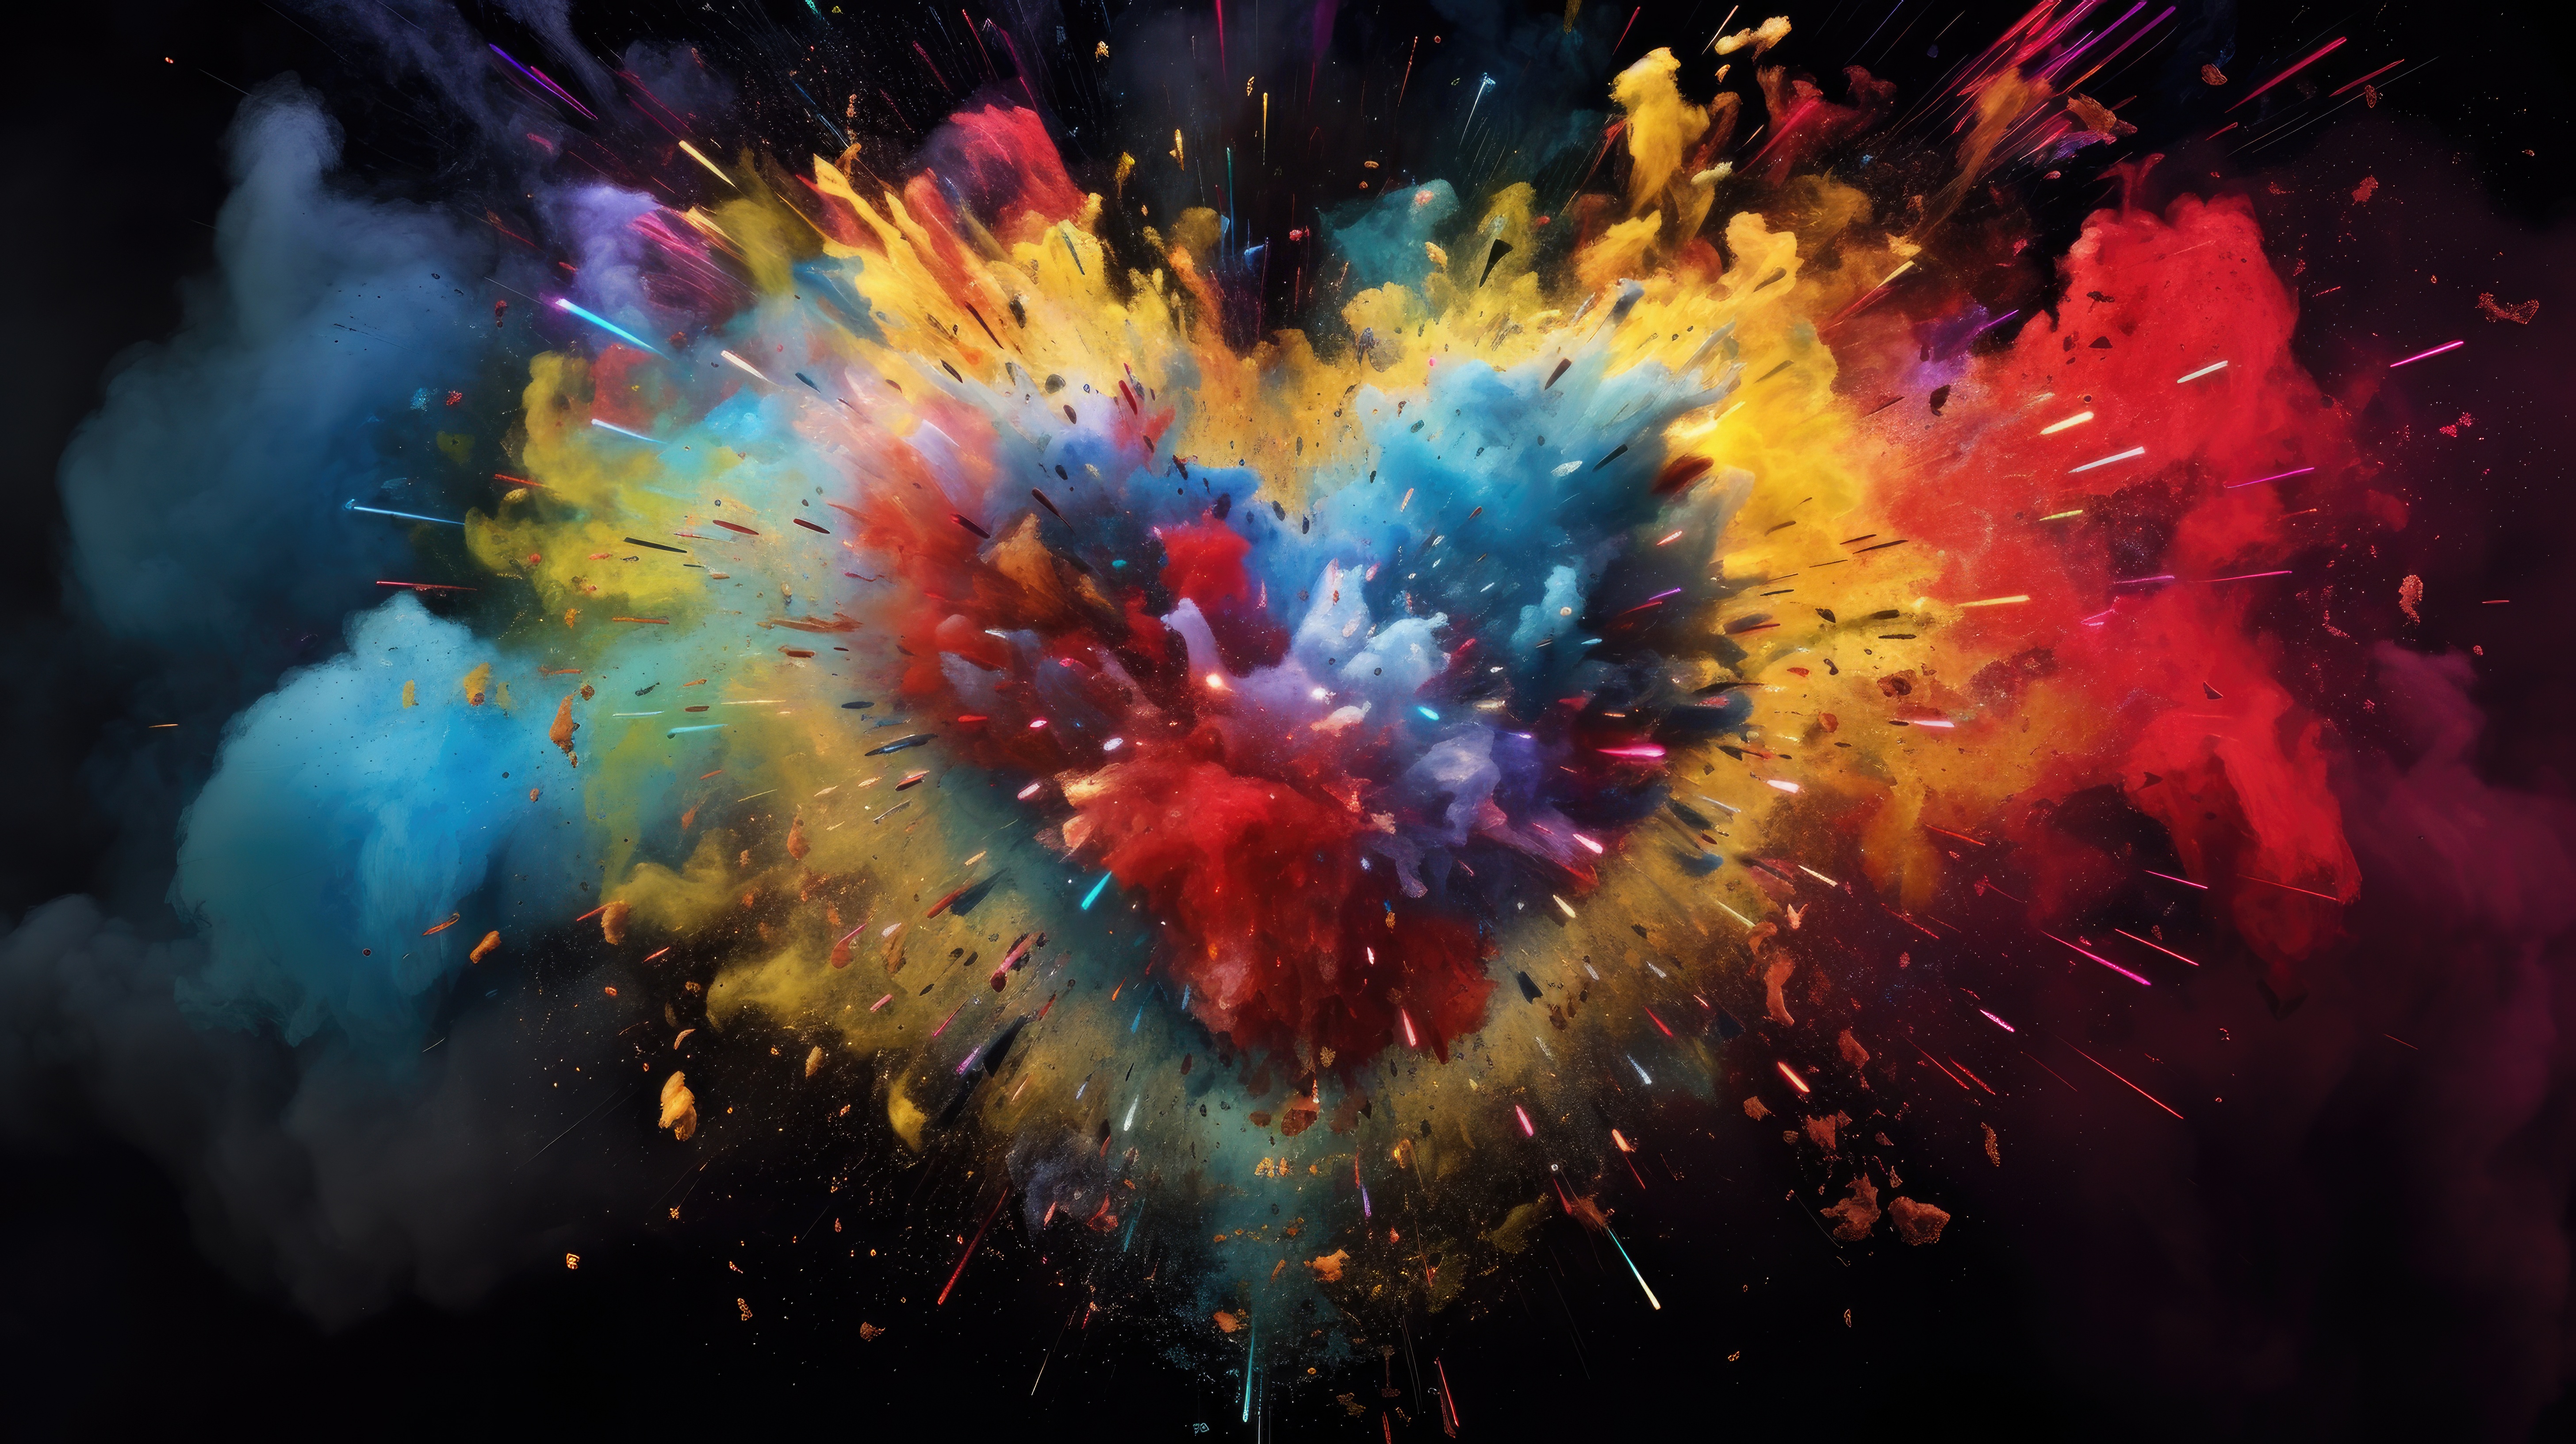 colourful heart backgrounds